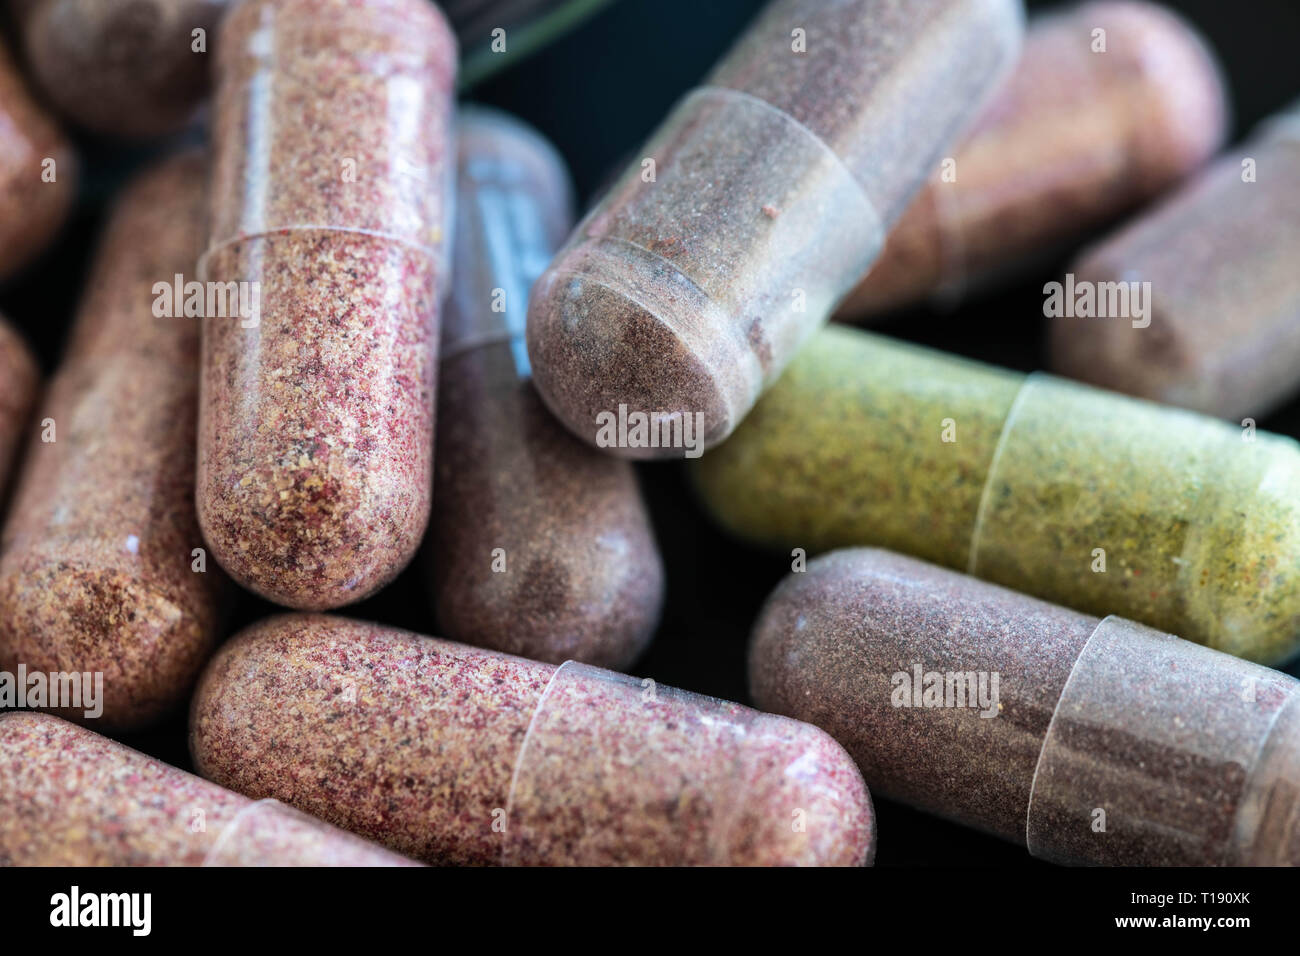 Colourful capsules of fruit and veggies supplements Stock Photo